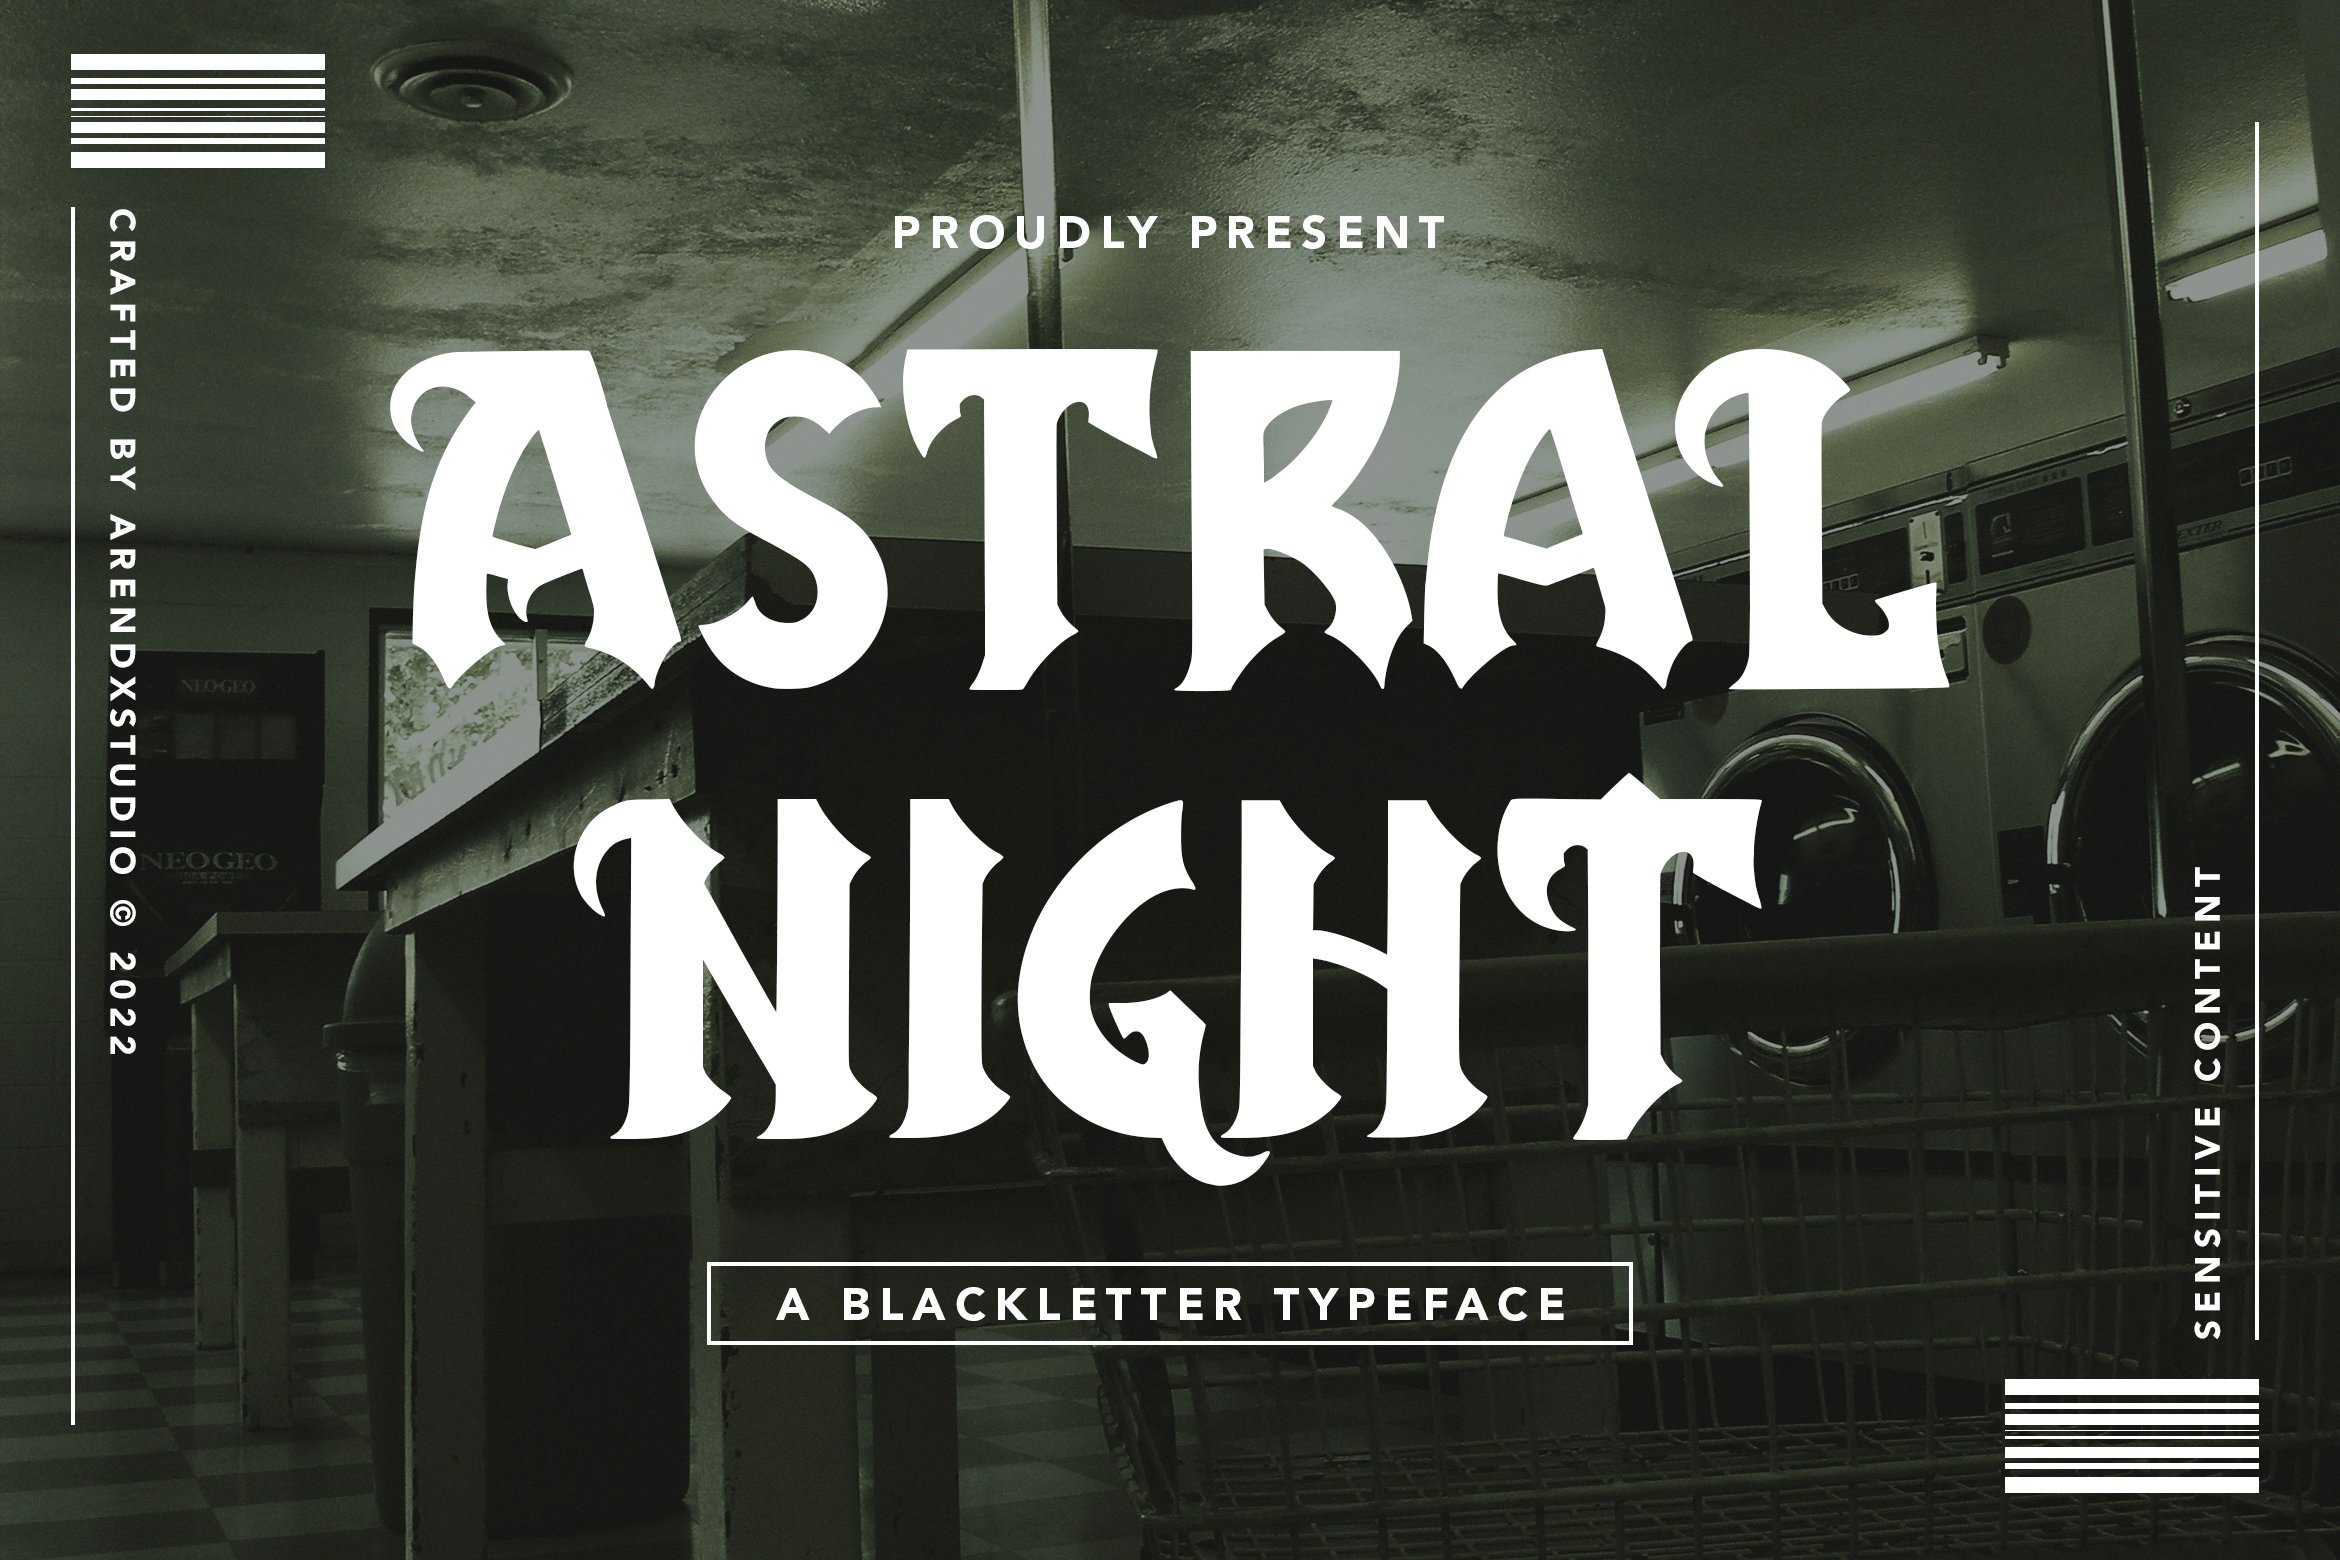 Astral Night - Blackletter Typeface cover image.